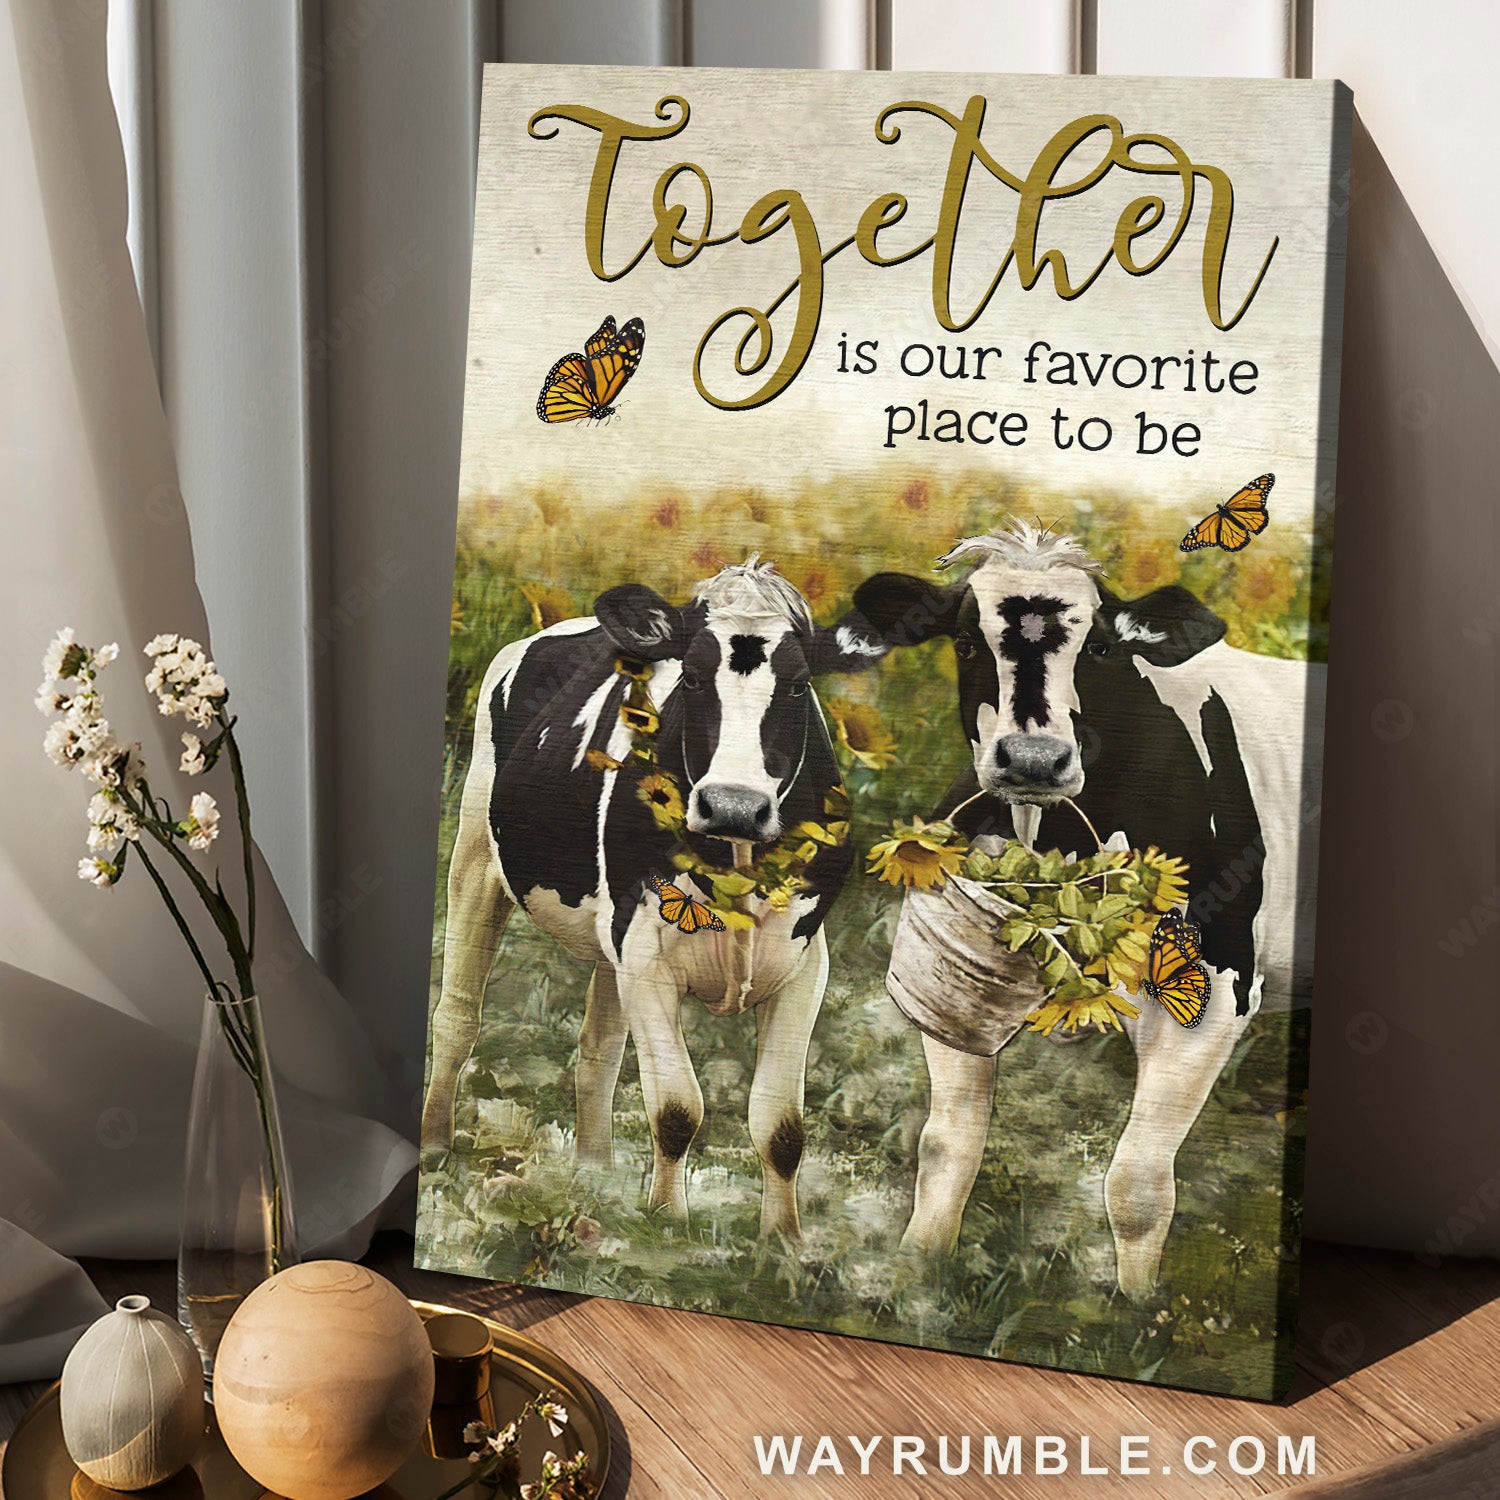 Diary cow drawing, Sunflower field, Together is our favorite place to be - Family Portrait Canvas Prints, Wall Art